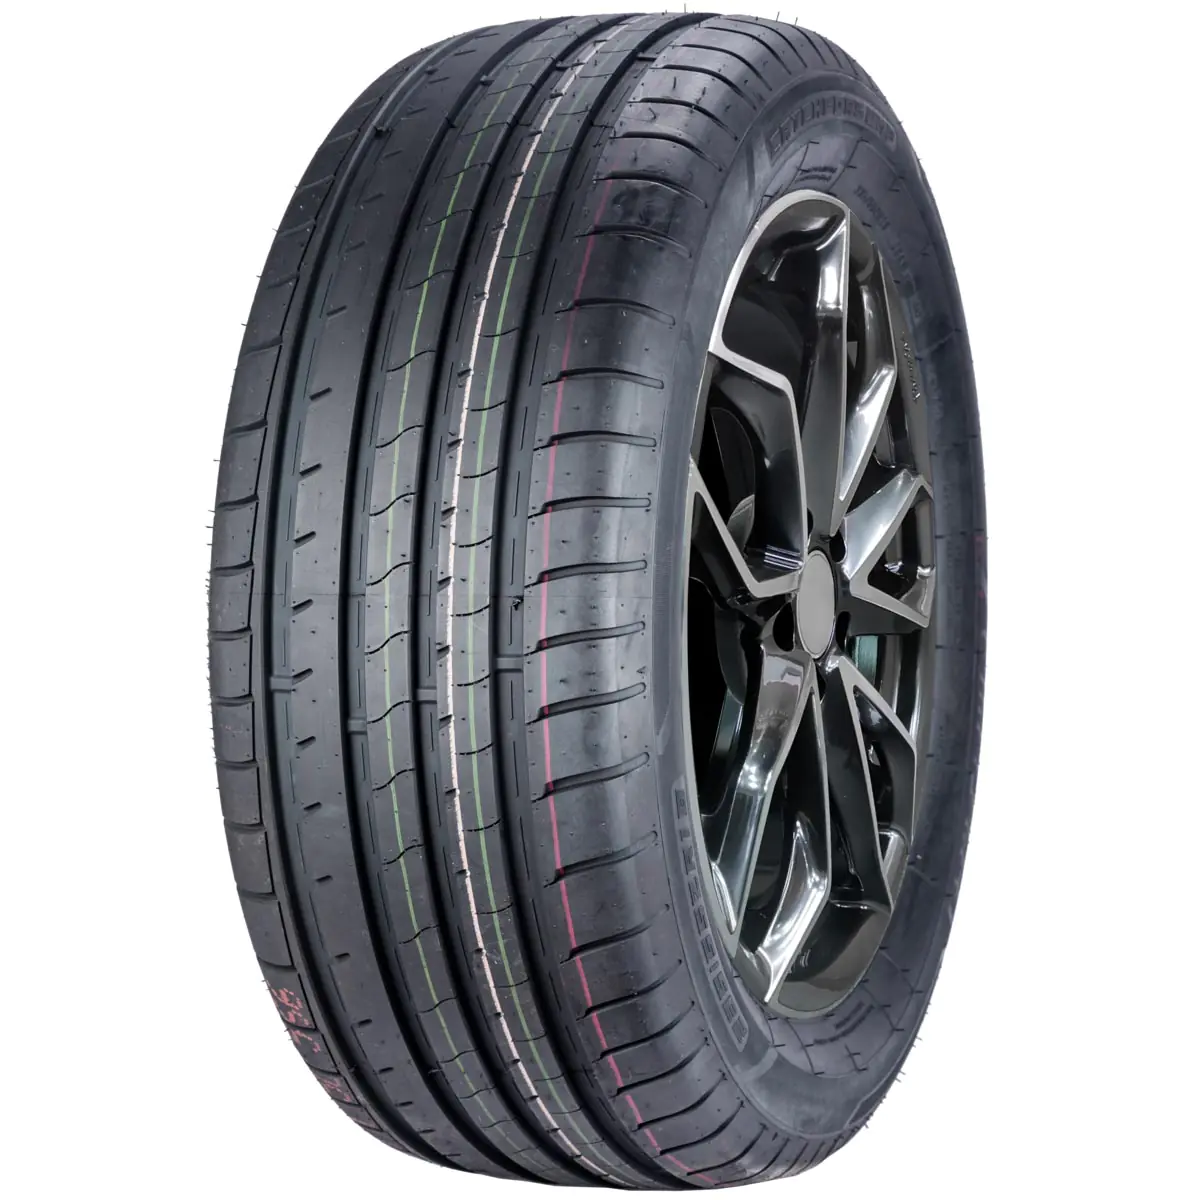 Gomme Autovettura Windforce 315/35 R21 111Y CATCHFORS UHP XL Estivo